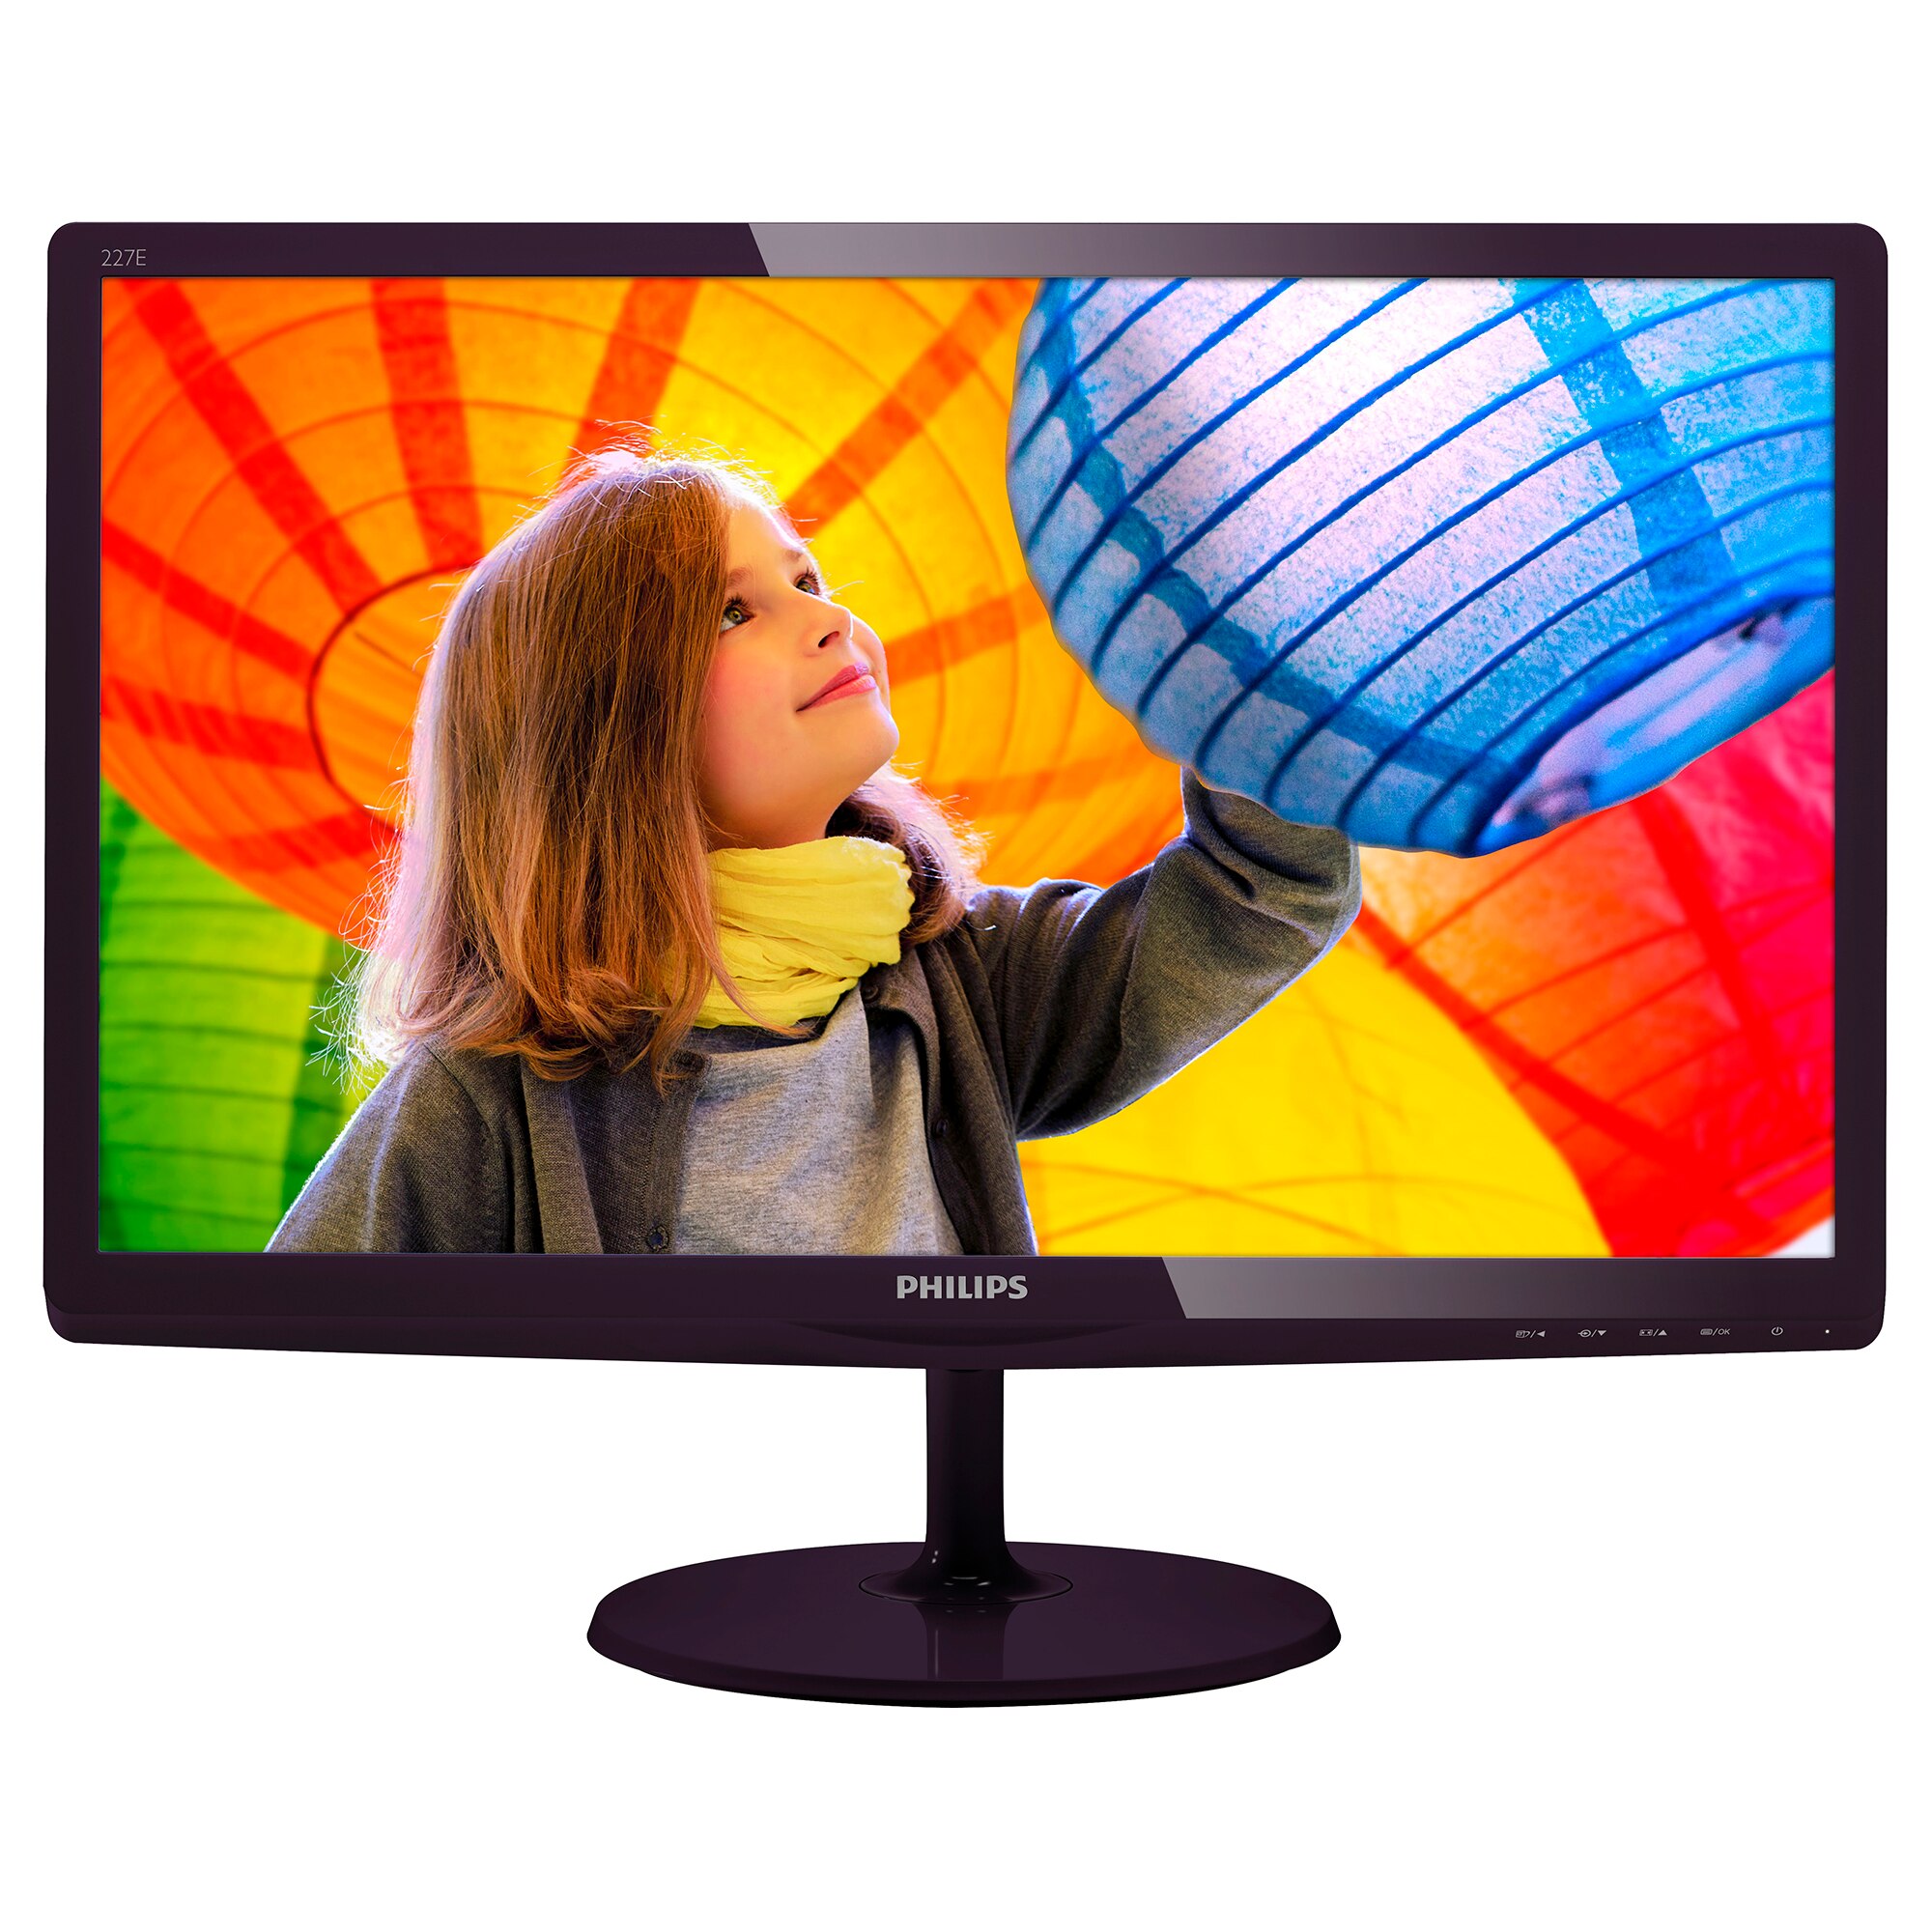 Removal exit sake Monitor LED PHILIPS 27", Full HD, IPS-ADS, Negru, 277E6EDAD - eMAG.ro